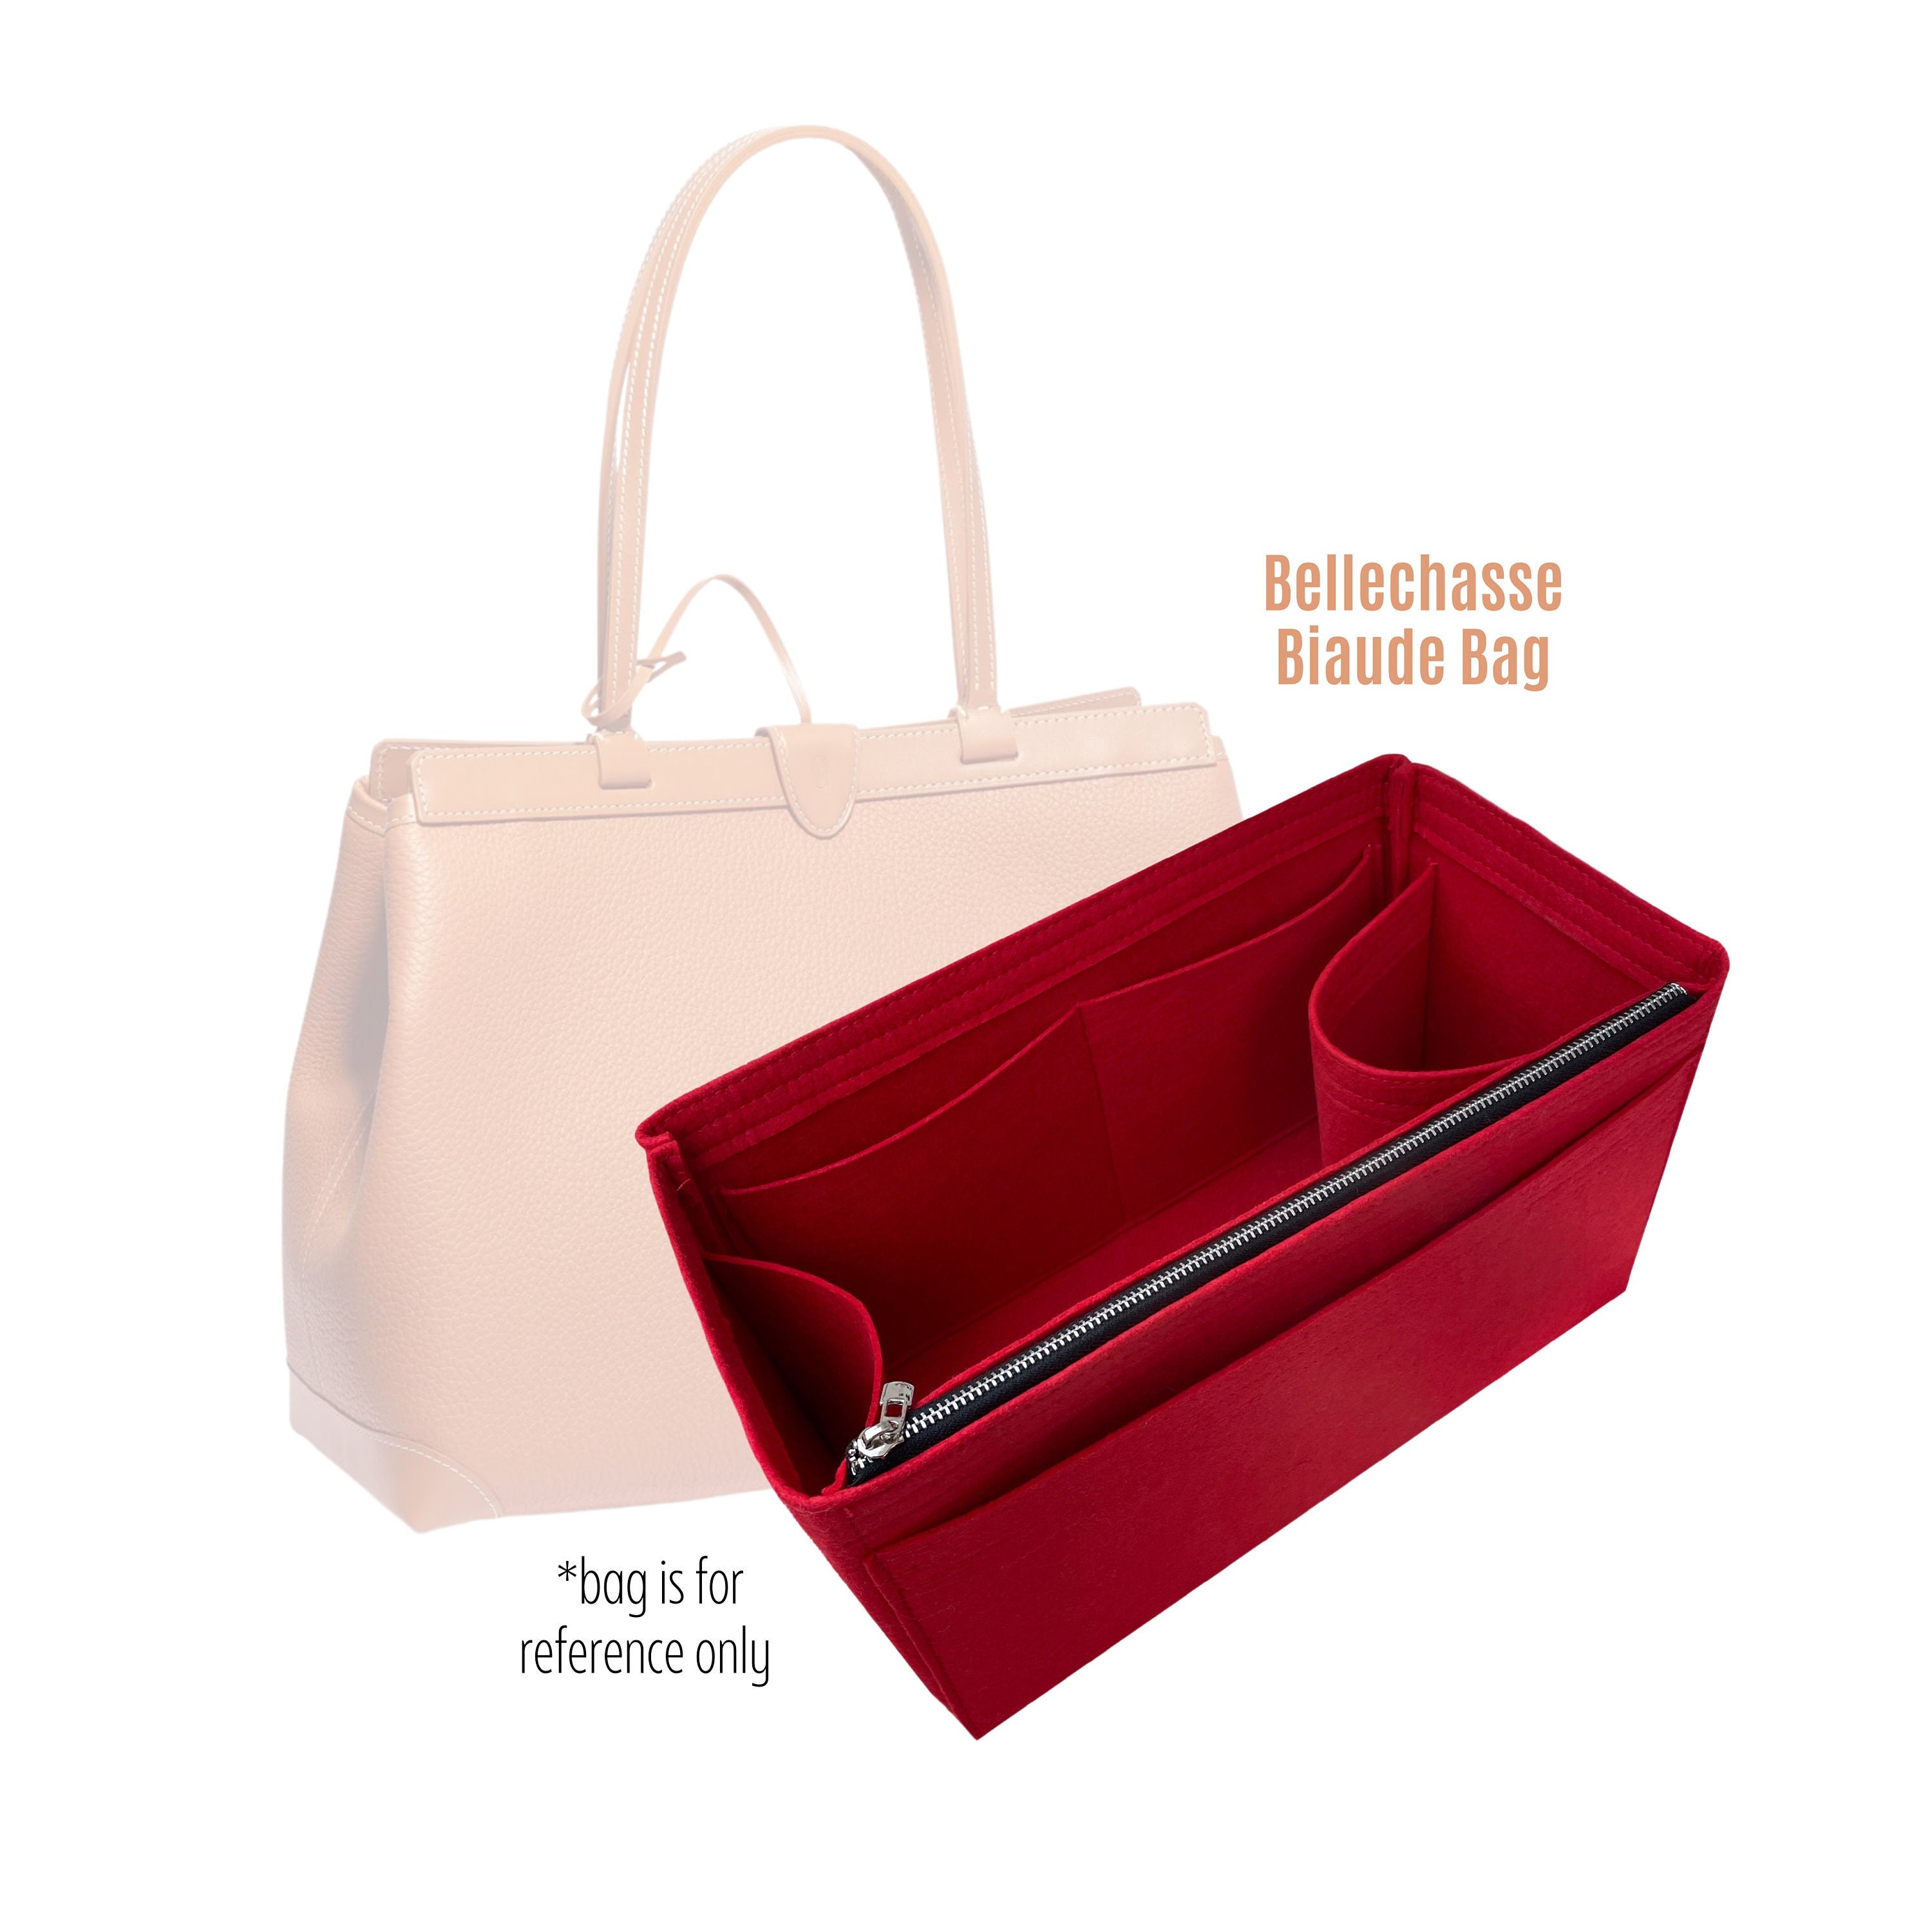 Handbag Organizer with Chambers Style for Louis Vuitton Neverfull PM, MM  and GM (Blush Pink) (More Colors Available)